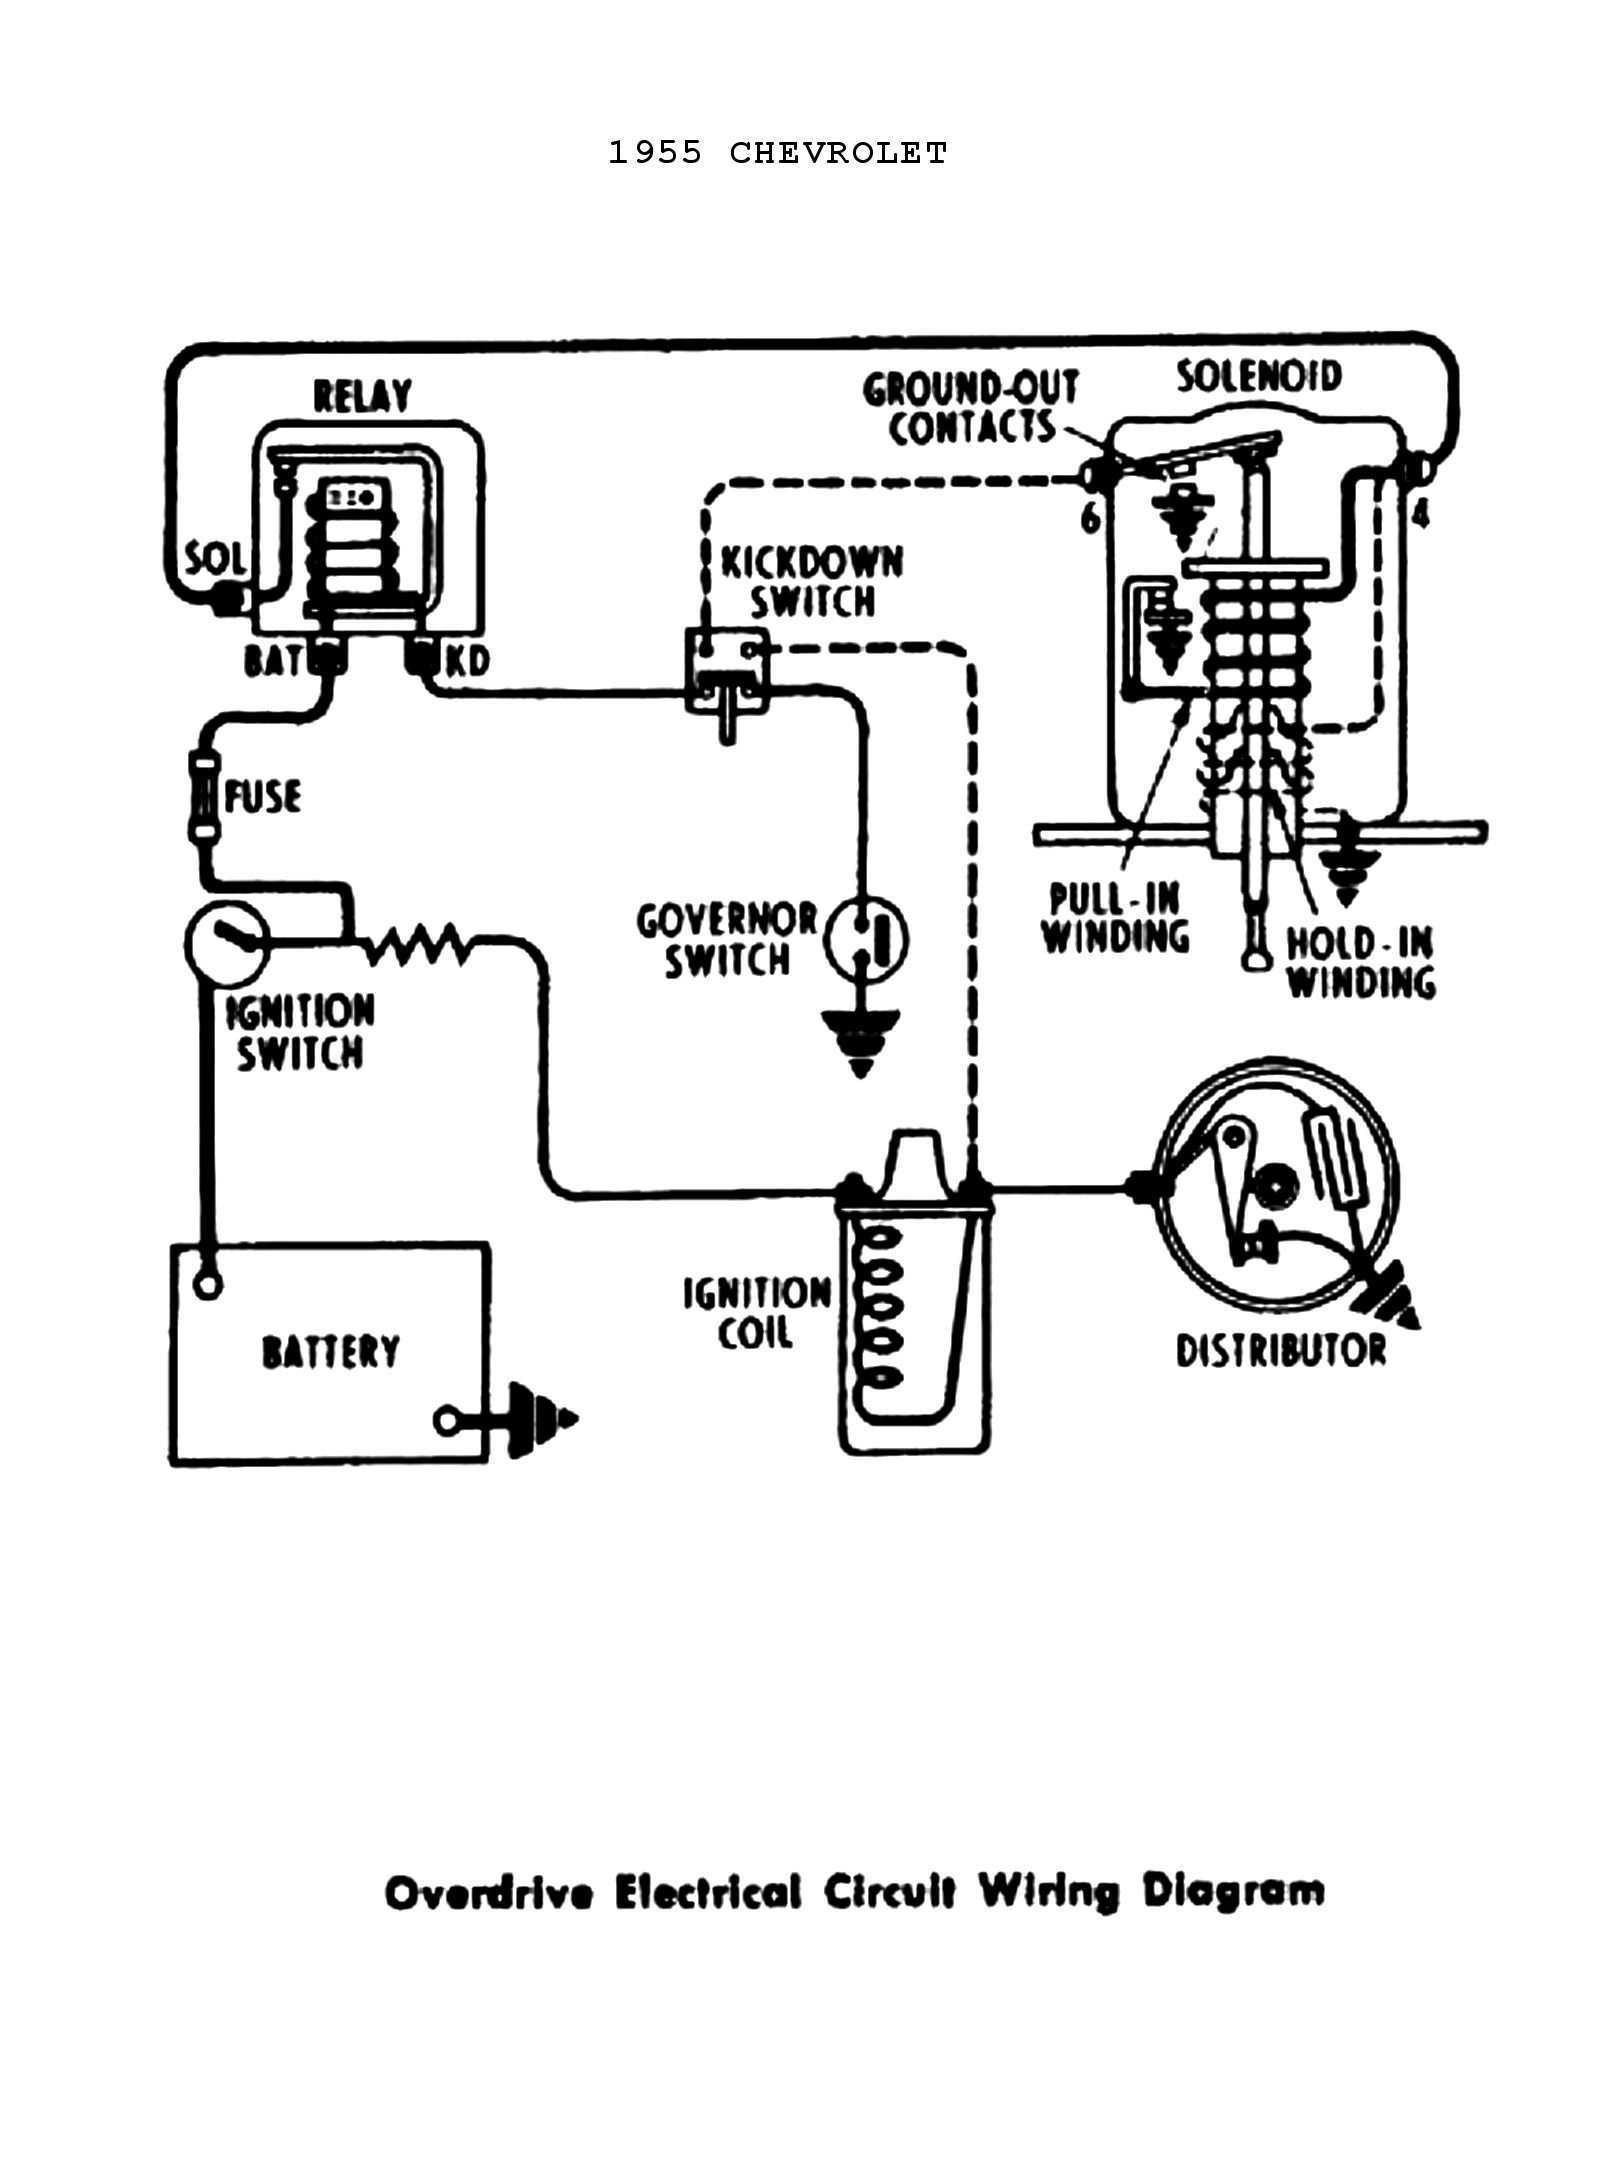 1955 Chevy Wiring Diagram Overdrive Wiring Data • Turn Signal Wiring Diagram Turn Signal Wiring